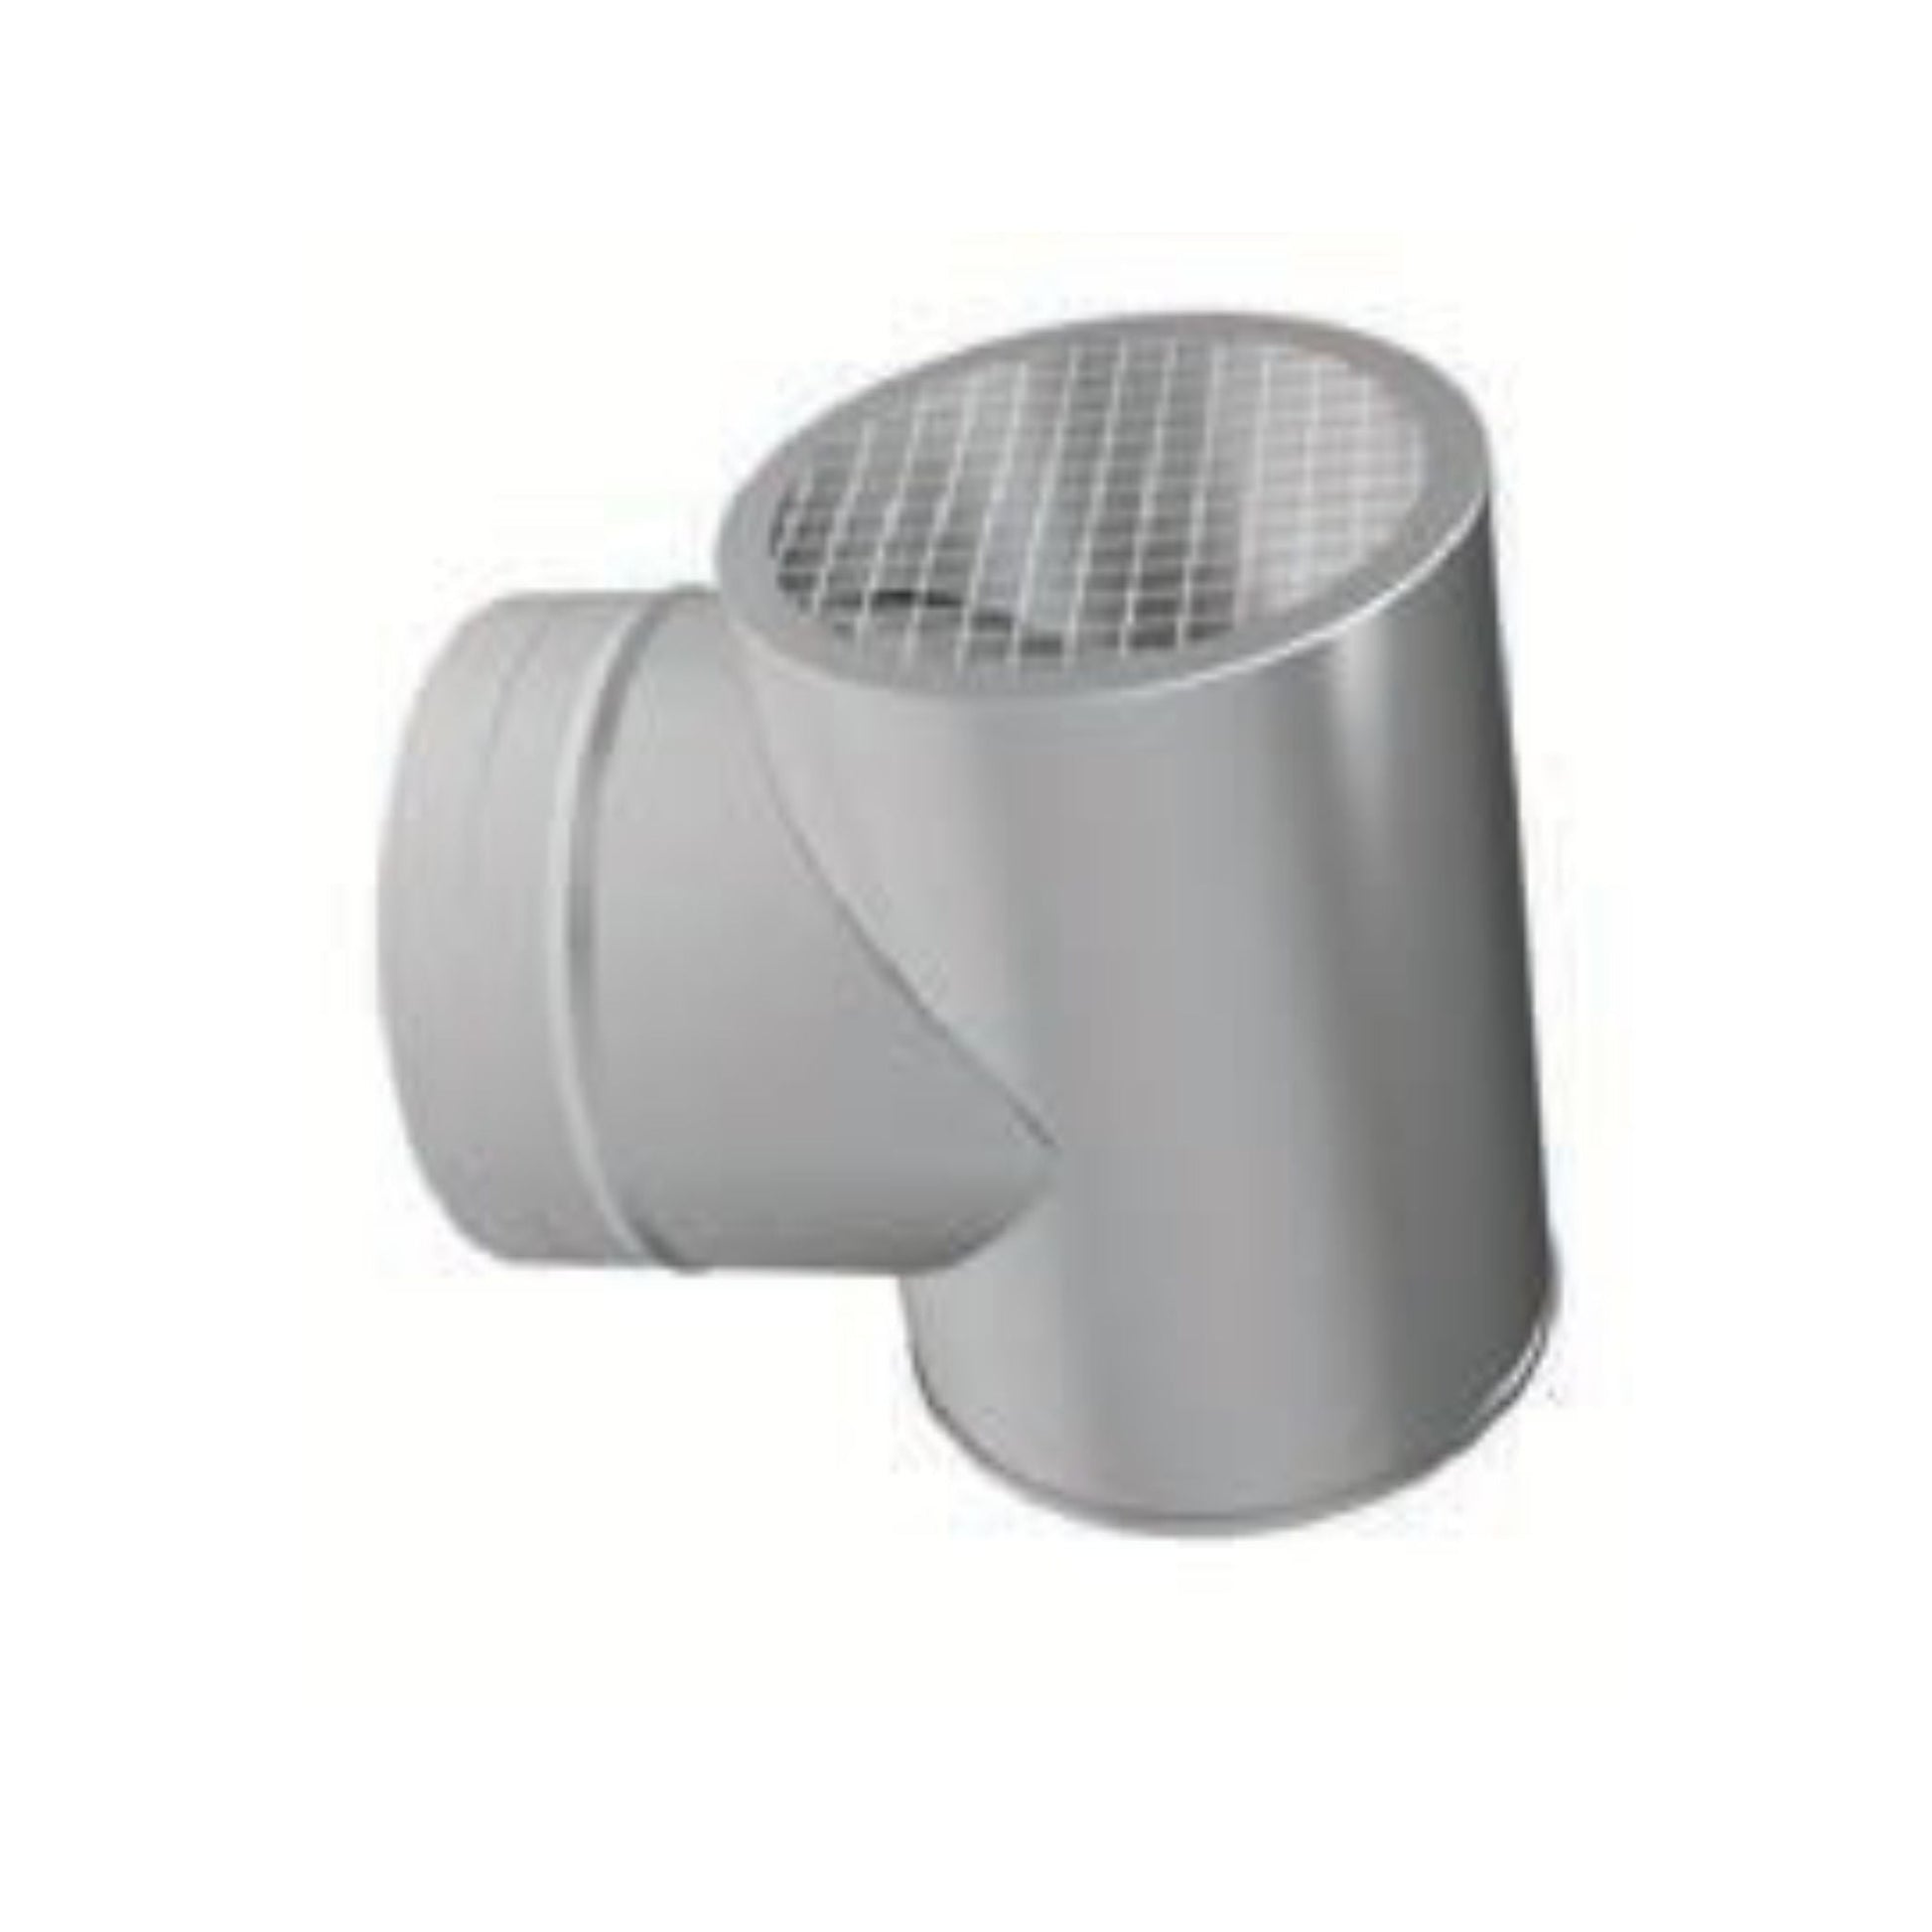 DuraVent FasNSeal 6" 29-4C Stainless Steel Termination Tee